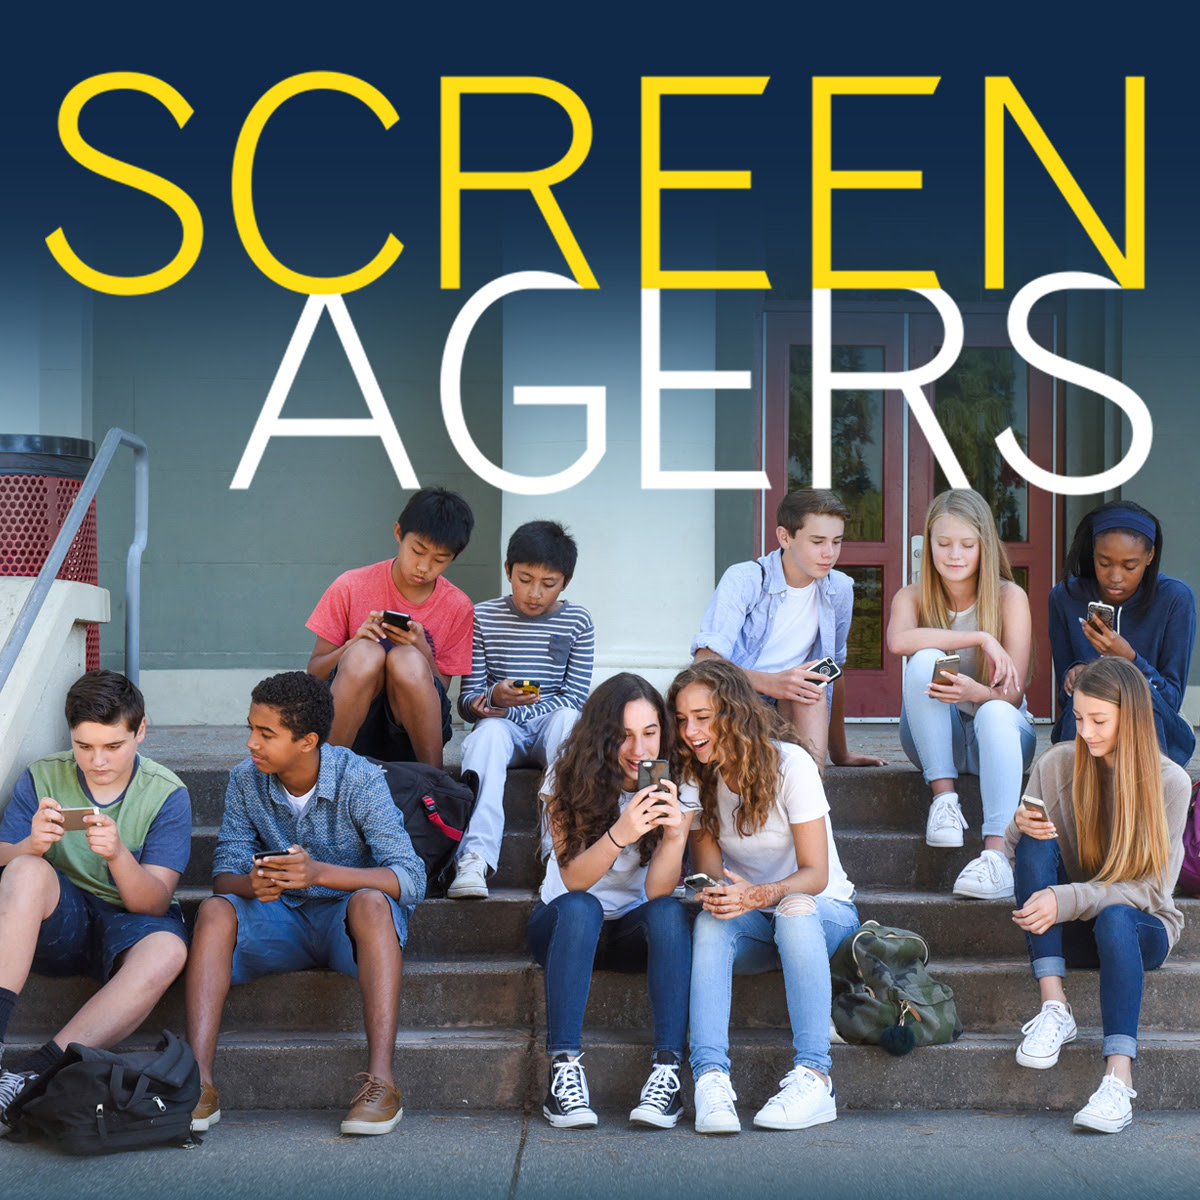 Screenagers Film Presented By Mayo Clinic Health System